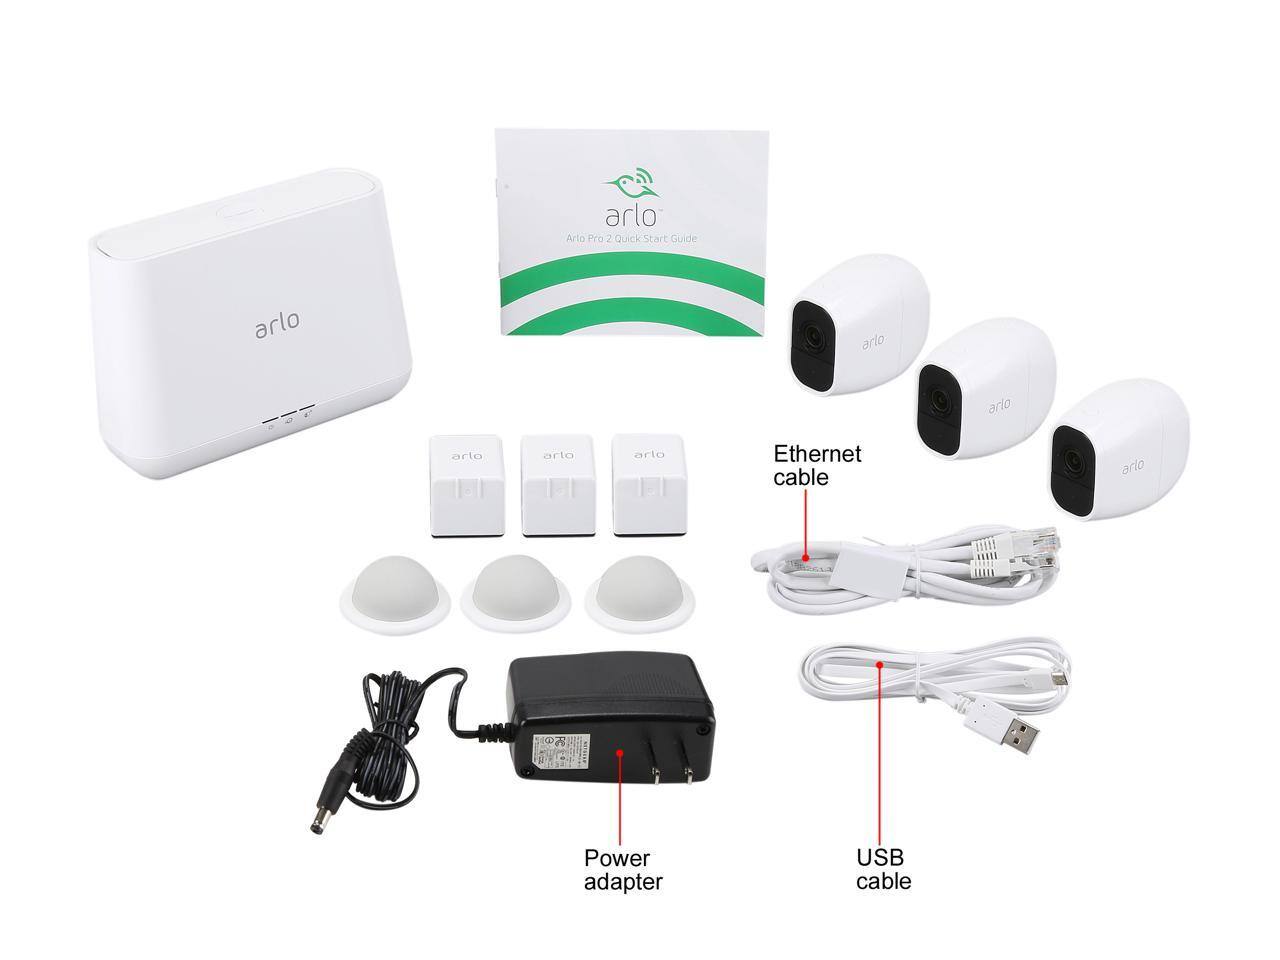 Arlo Pro 2 Wireless Security Camera System [3 Rechargeable Battery Powered Cameras with 2-Way Audio] for $299.99 after Promo Code + F/S